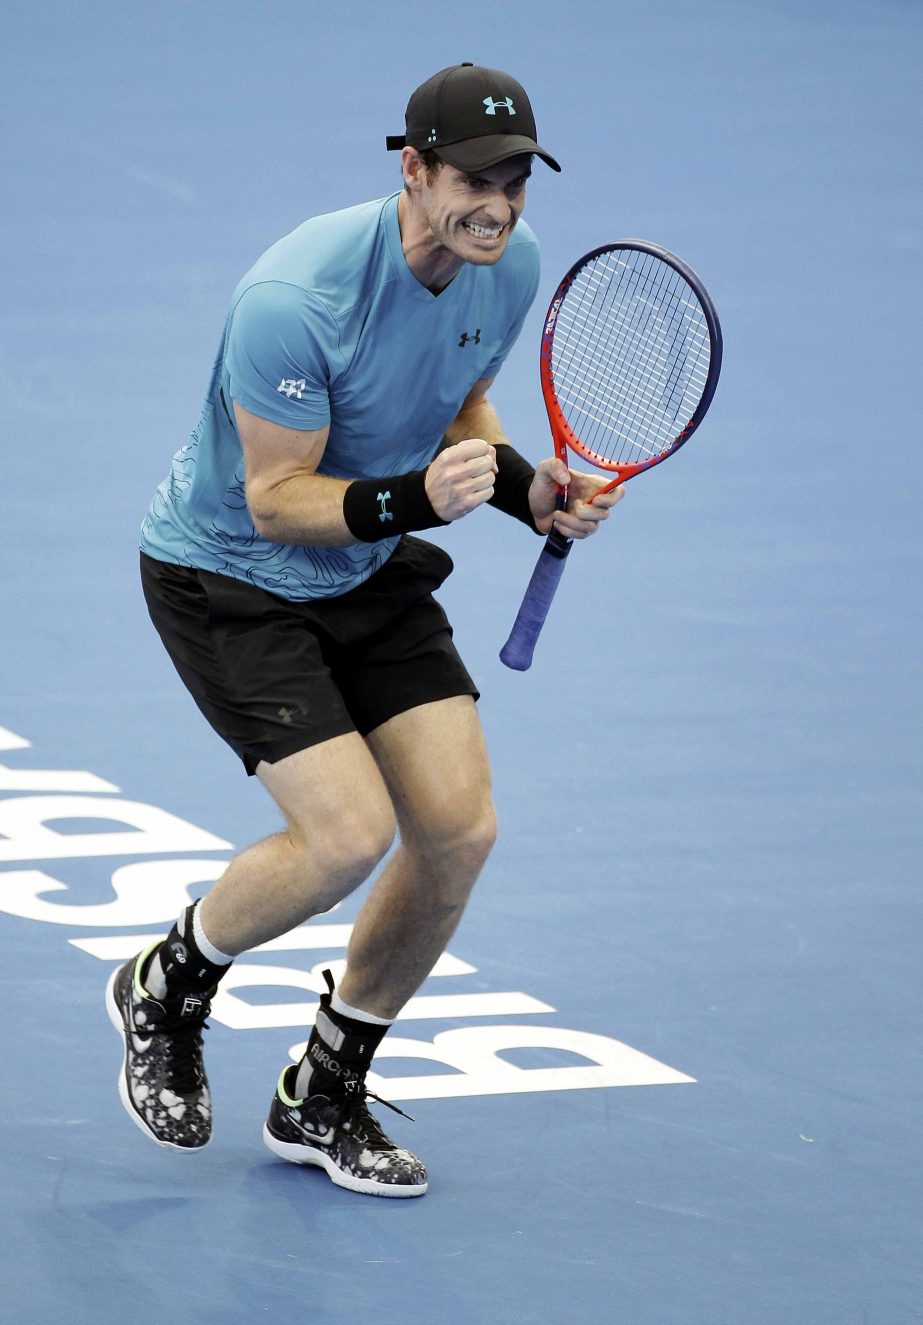 Andy Murray of Britain reacts after winning his match against James Duckworth of Australia at the Brisbane International tennis tournament in Brisbane, Australia on Tuesday.